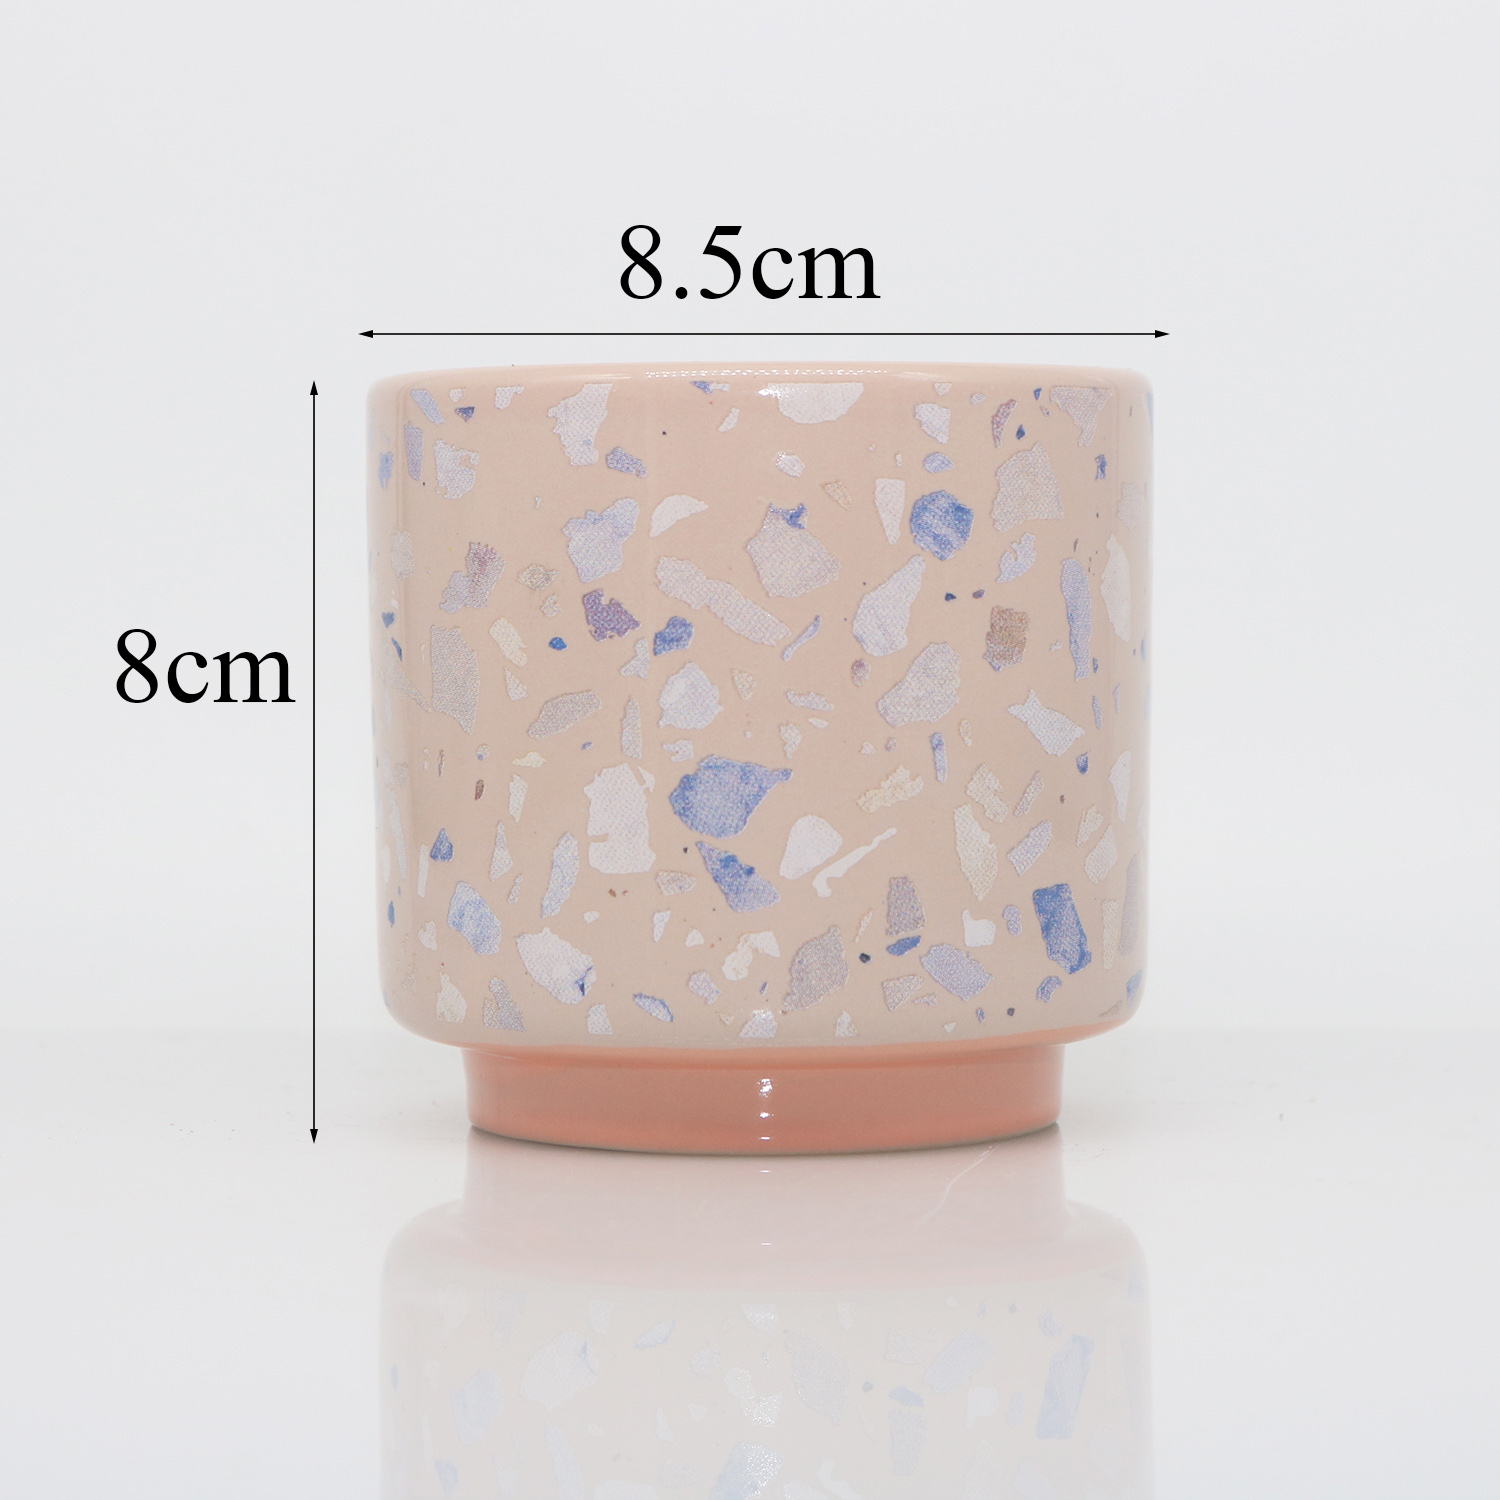 High Quality Ceramic Candle with Popular Fragrance for Gift